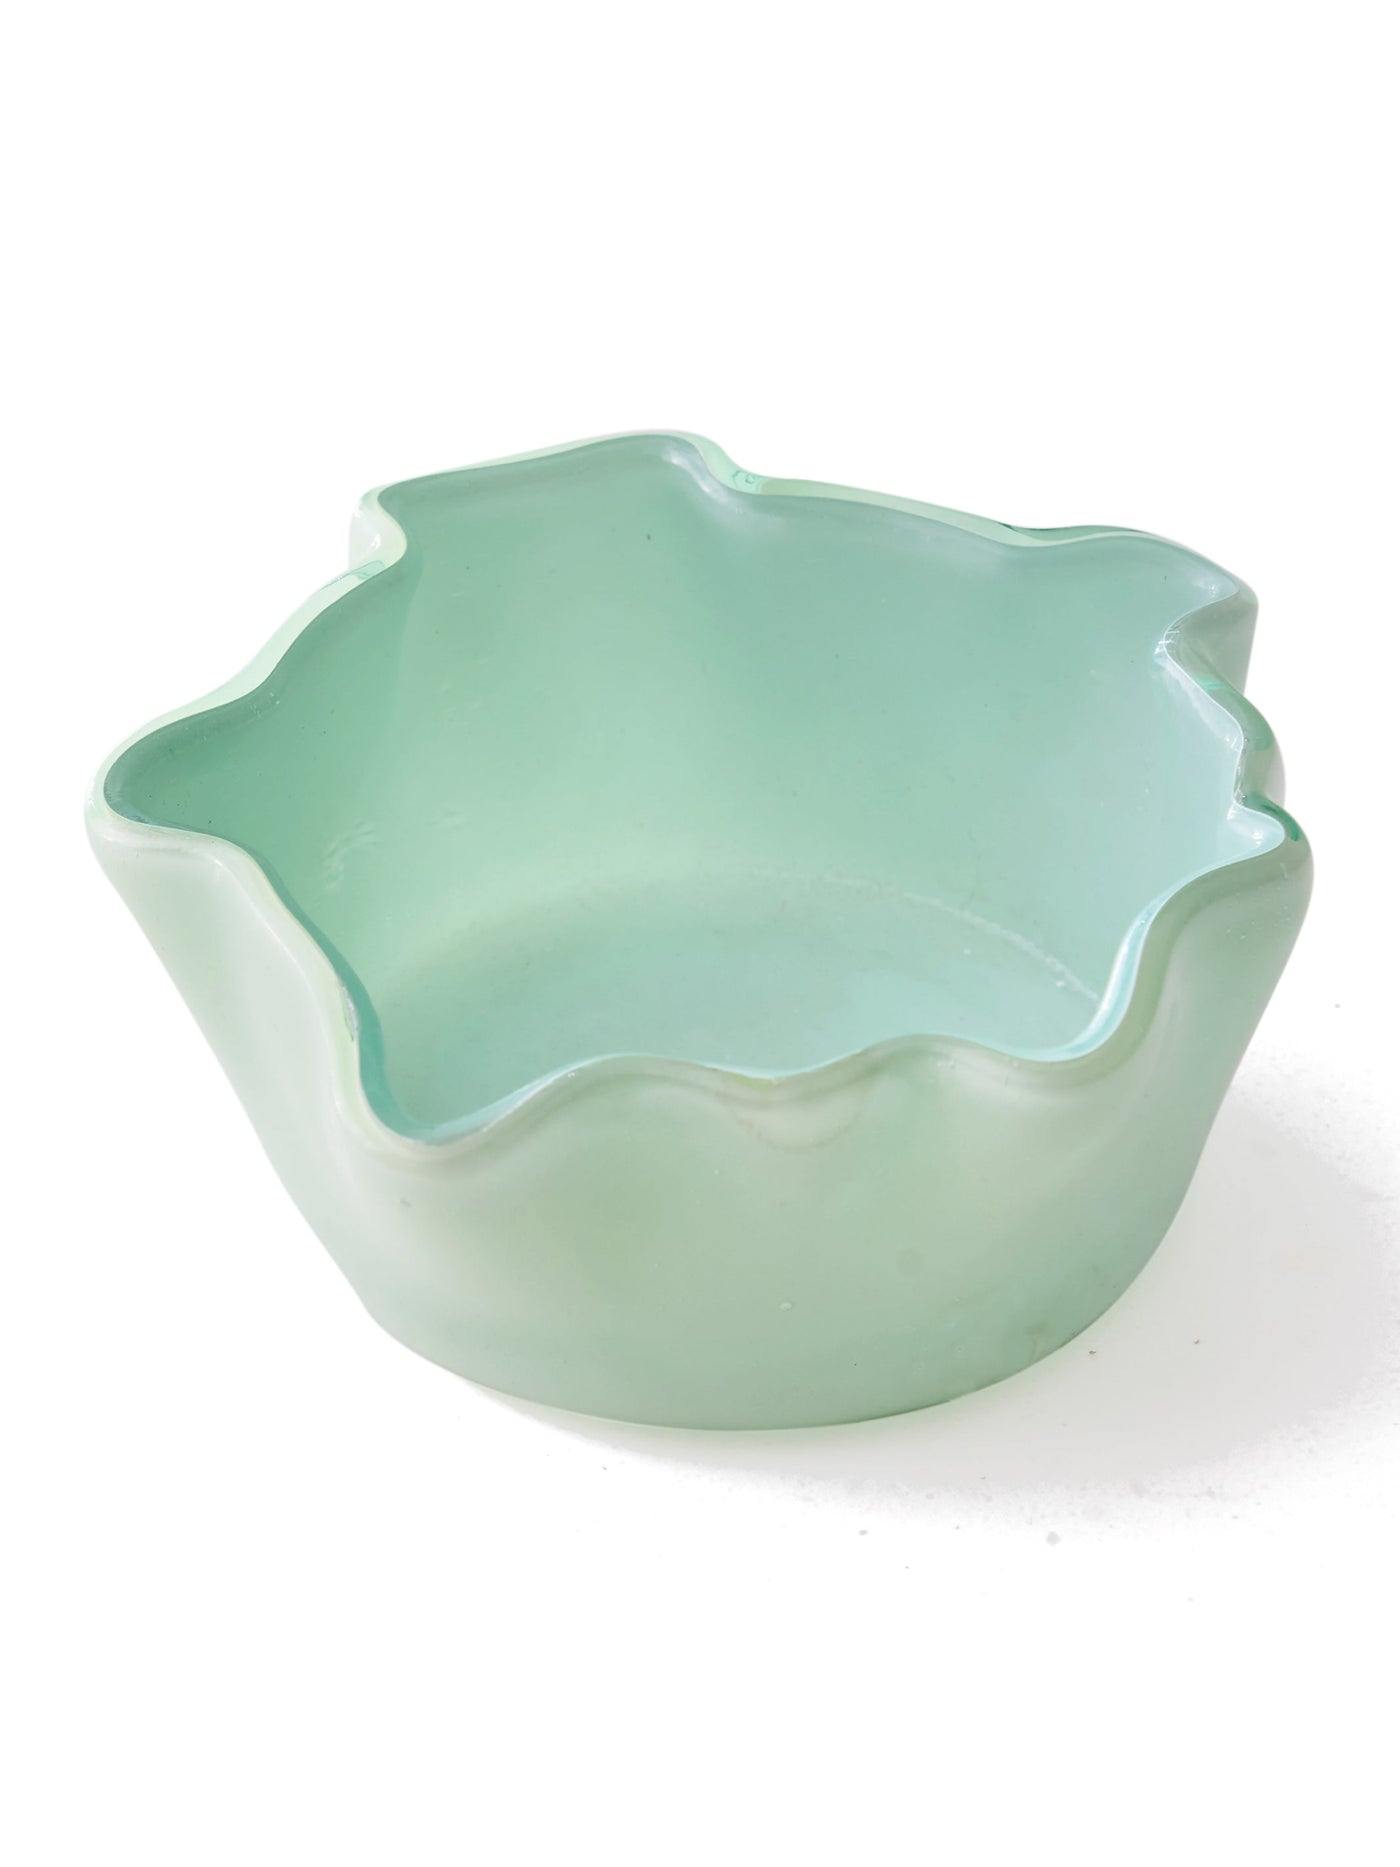 Handmade Glass Flower Bowl in Rose by Caju Collective